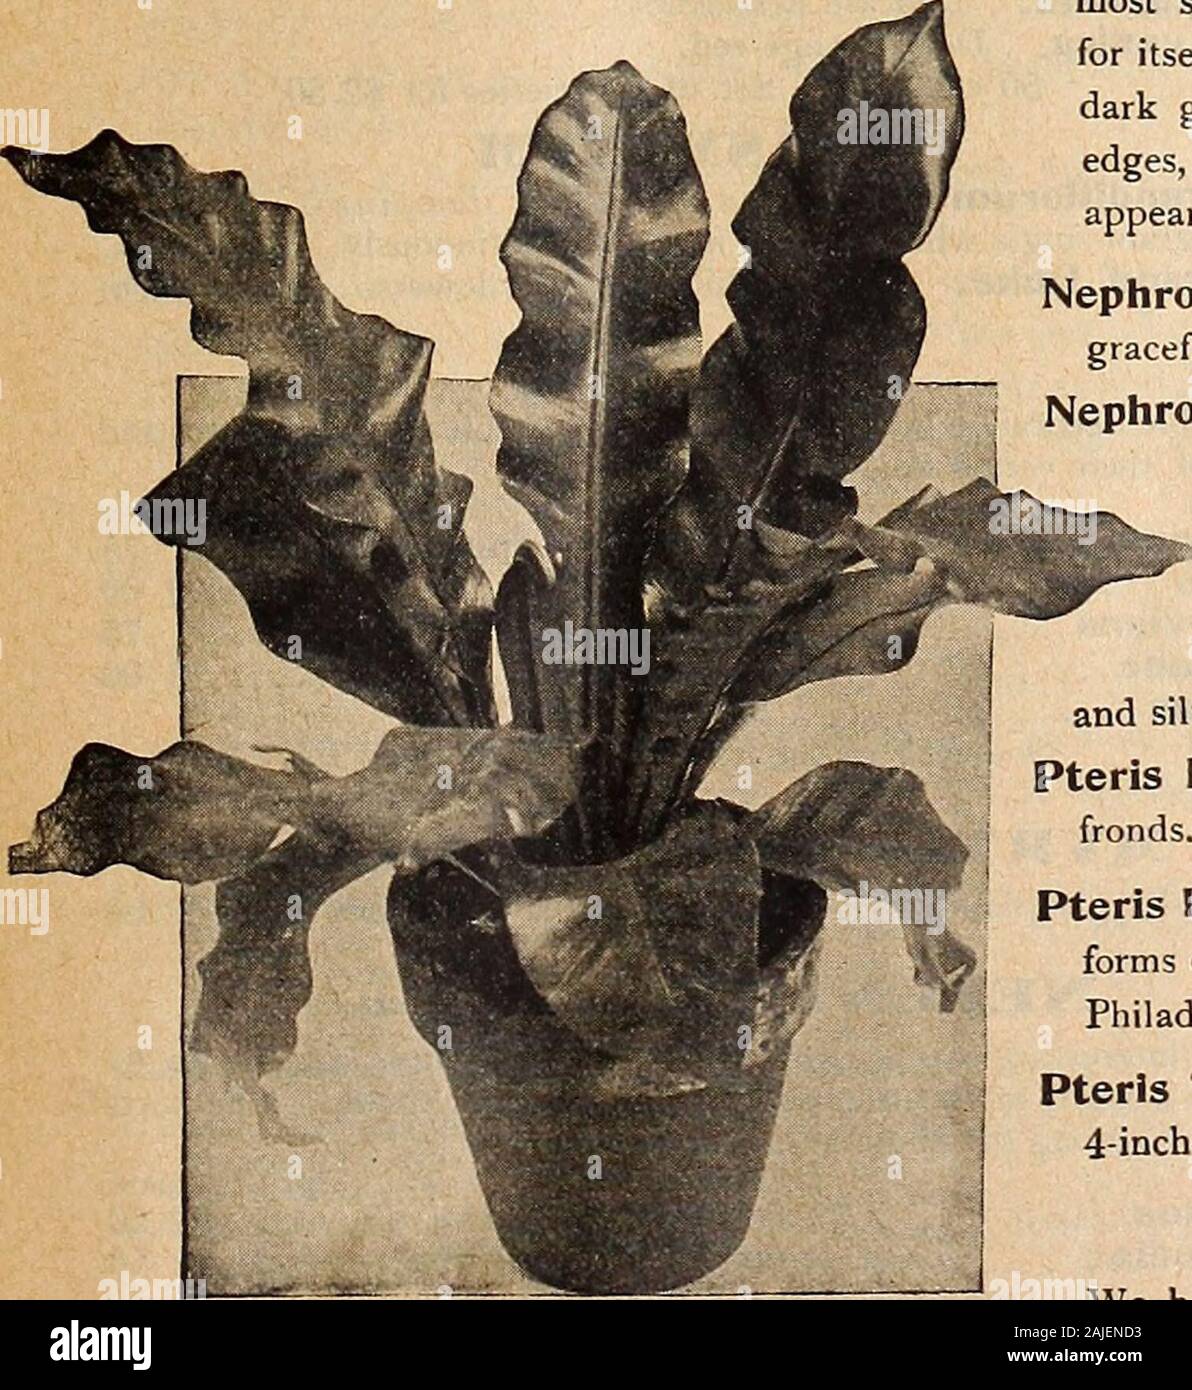 Dreer's autumn catalogue 1918 . n Fern). A dwarf-growingform; a beautiful Fern, 6-inch pots, $1.00 each. Pteris Argyraea. A strong growing variety, with pretty greenand silvery-white variegated bold foliage. 4-inch pots, 35 cts. each.Pteris Distinction. A splendid decorative sort with narrow cut dark greenfronds. 4-inch pots, 35 cts. each. Pteris Rivertoniana. The most distinct and desirable of the many crestedforms of the Pteris, awarded a silver medal at the National Flower Show,Philadelphia, 1916. 4-inch pots, 35 cts. each. Pteris Tremula. An old favorite of rapid growth with rich green fol Stock Photo